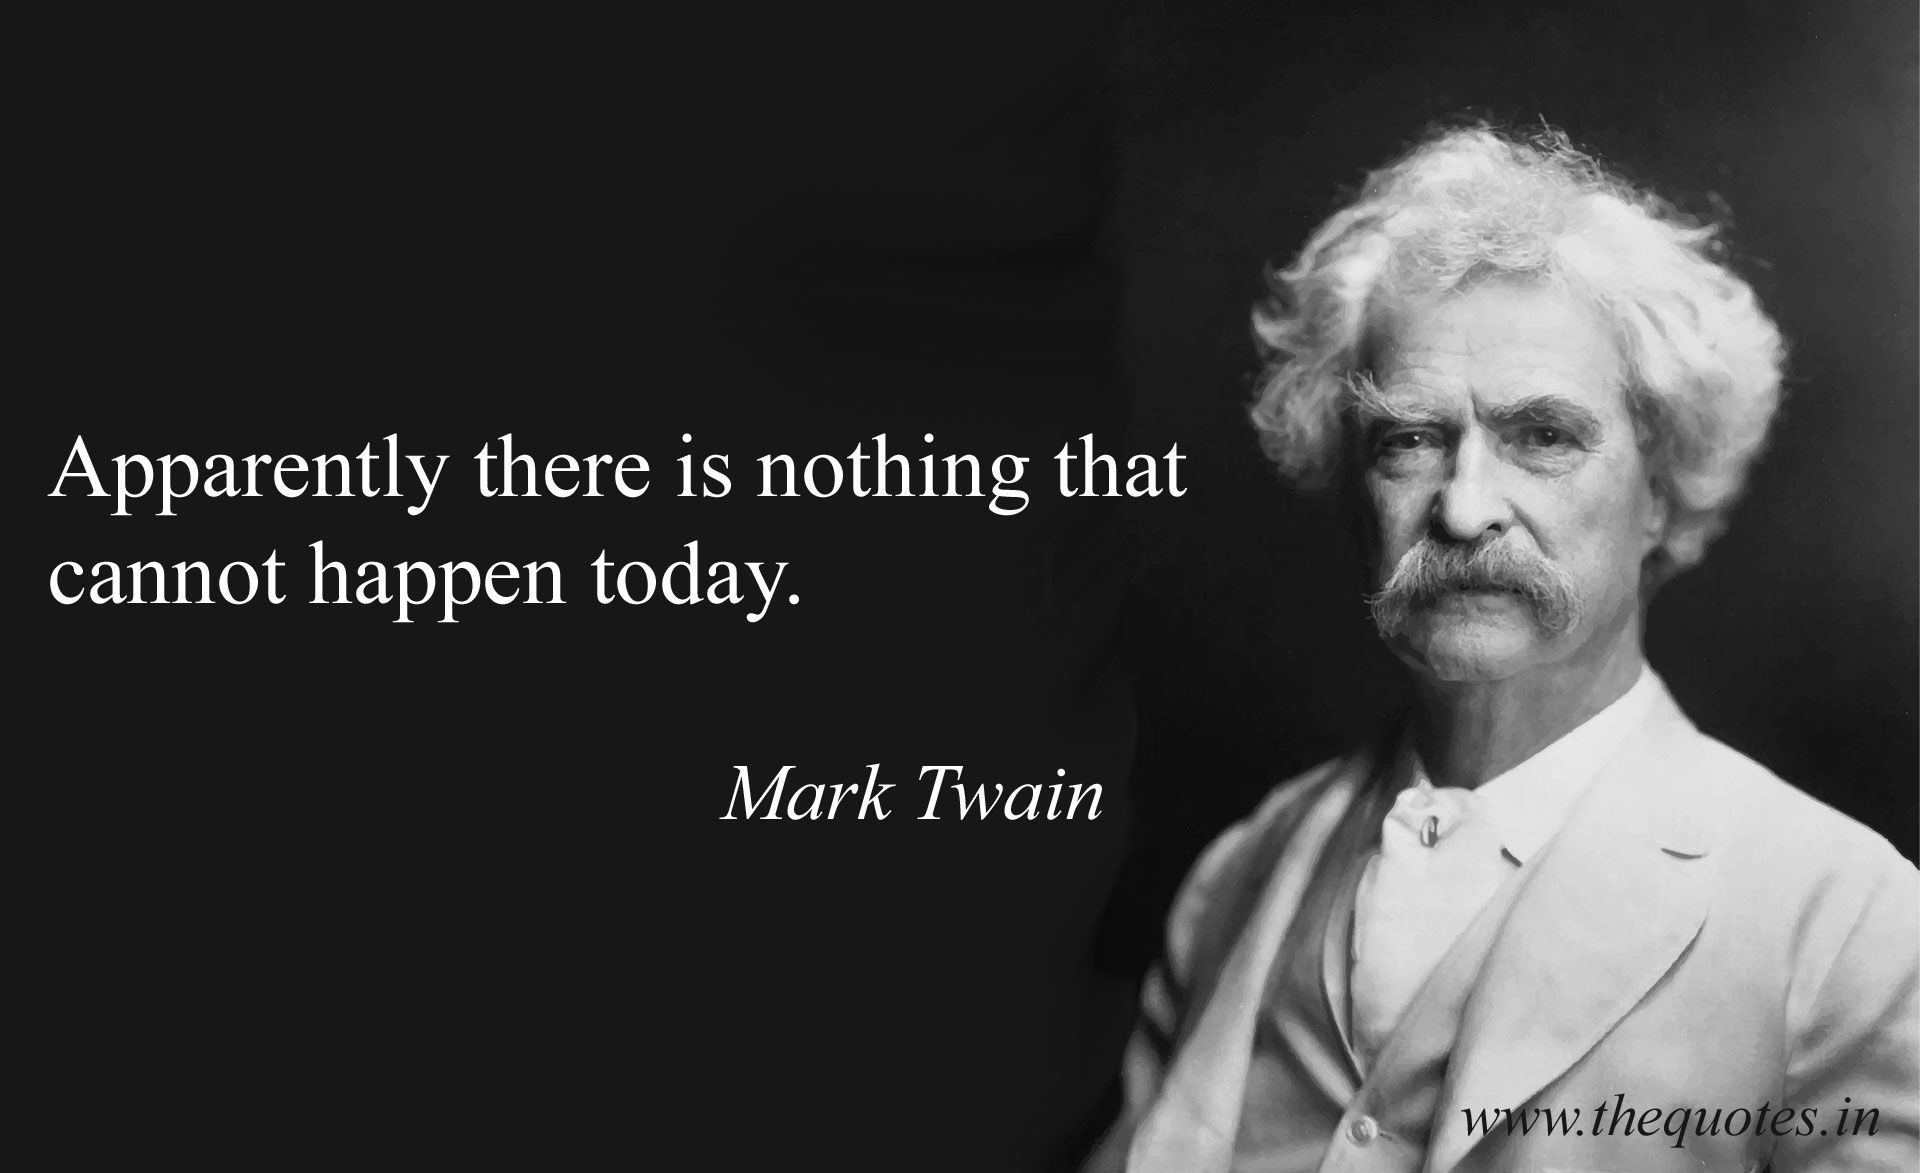 Mark Twain, nothing cannot happen today